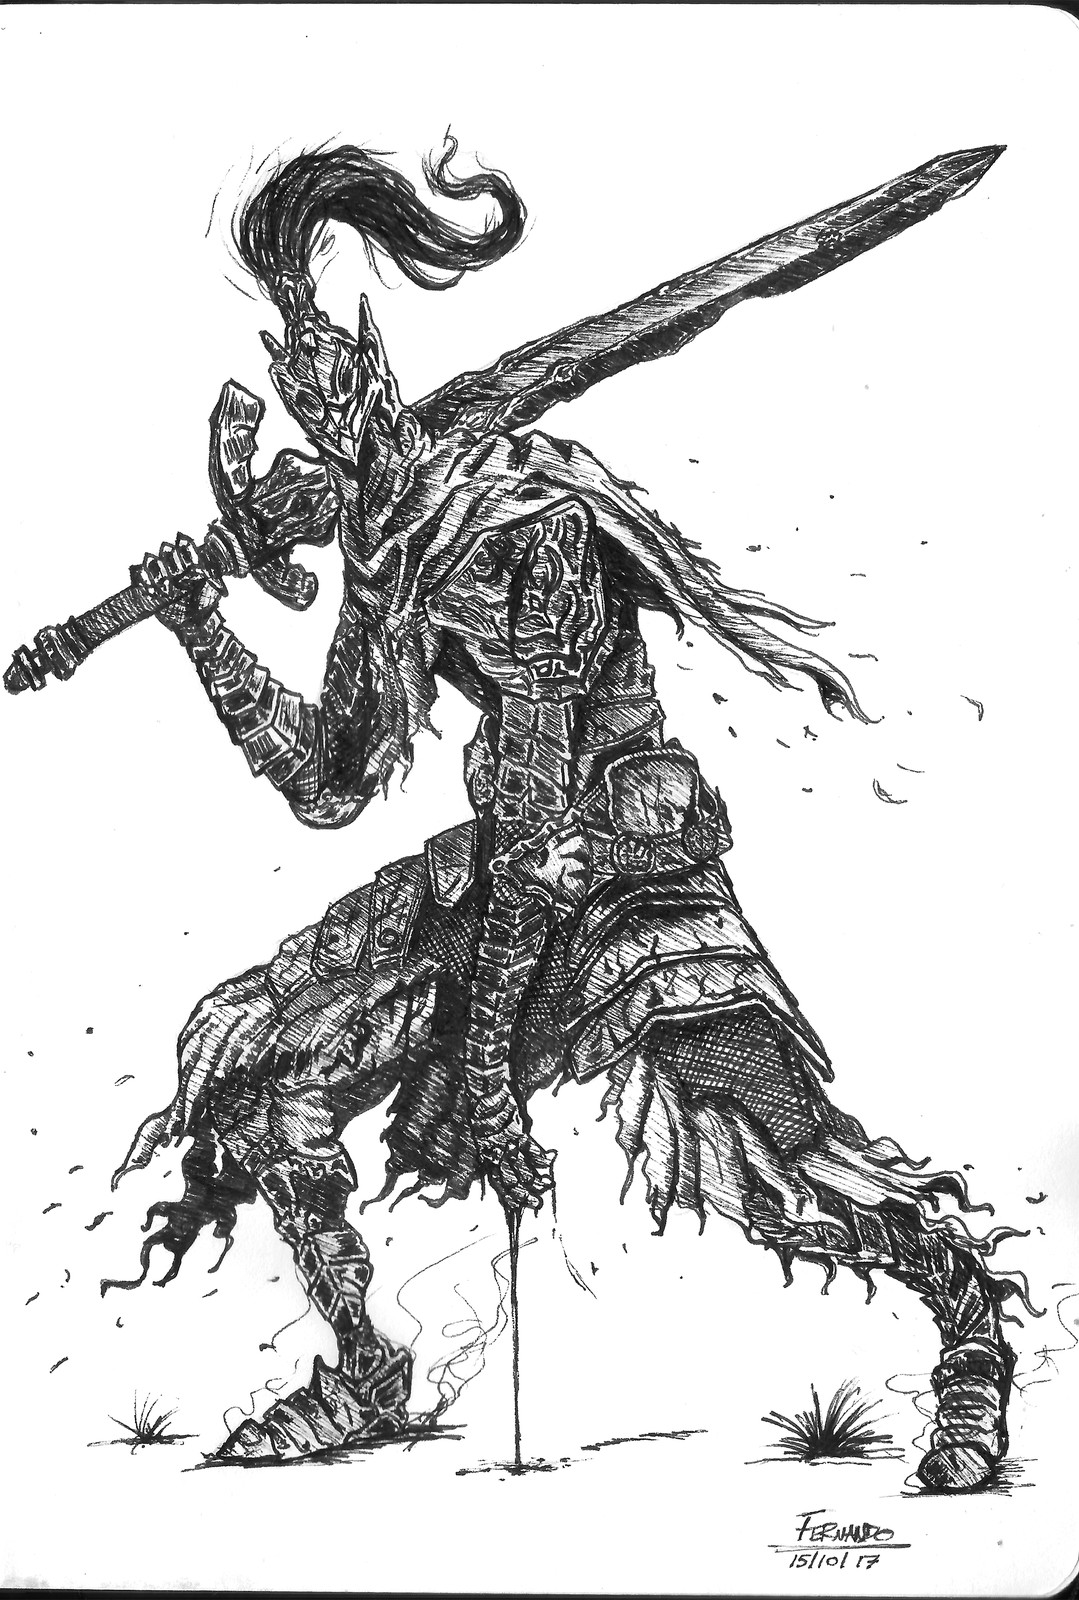 Nankin illustrations from Dark Soul's character Artorias The Abysswalker made in my sketchbook